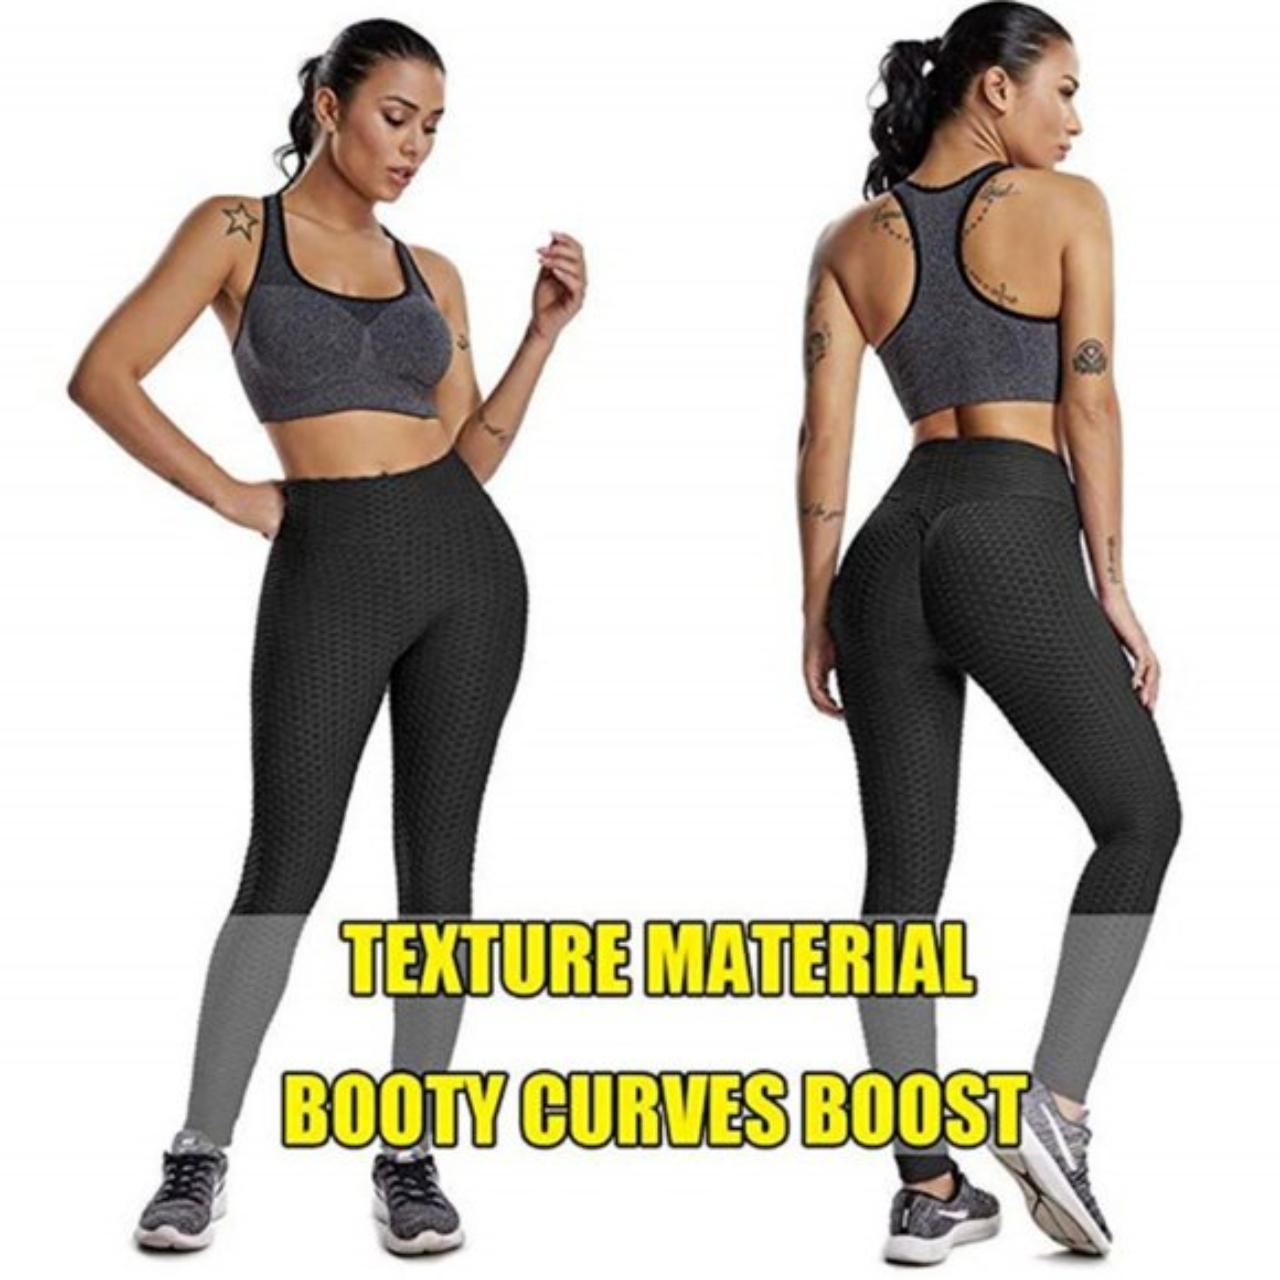 High waisted anti cellulite Aoxjox contour leggings - Depop